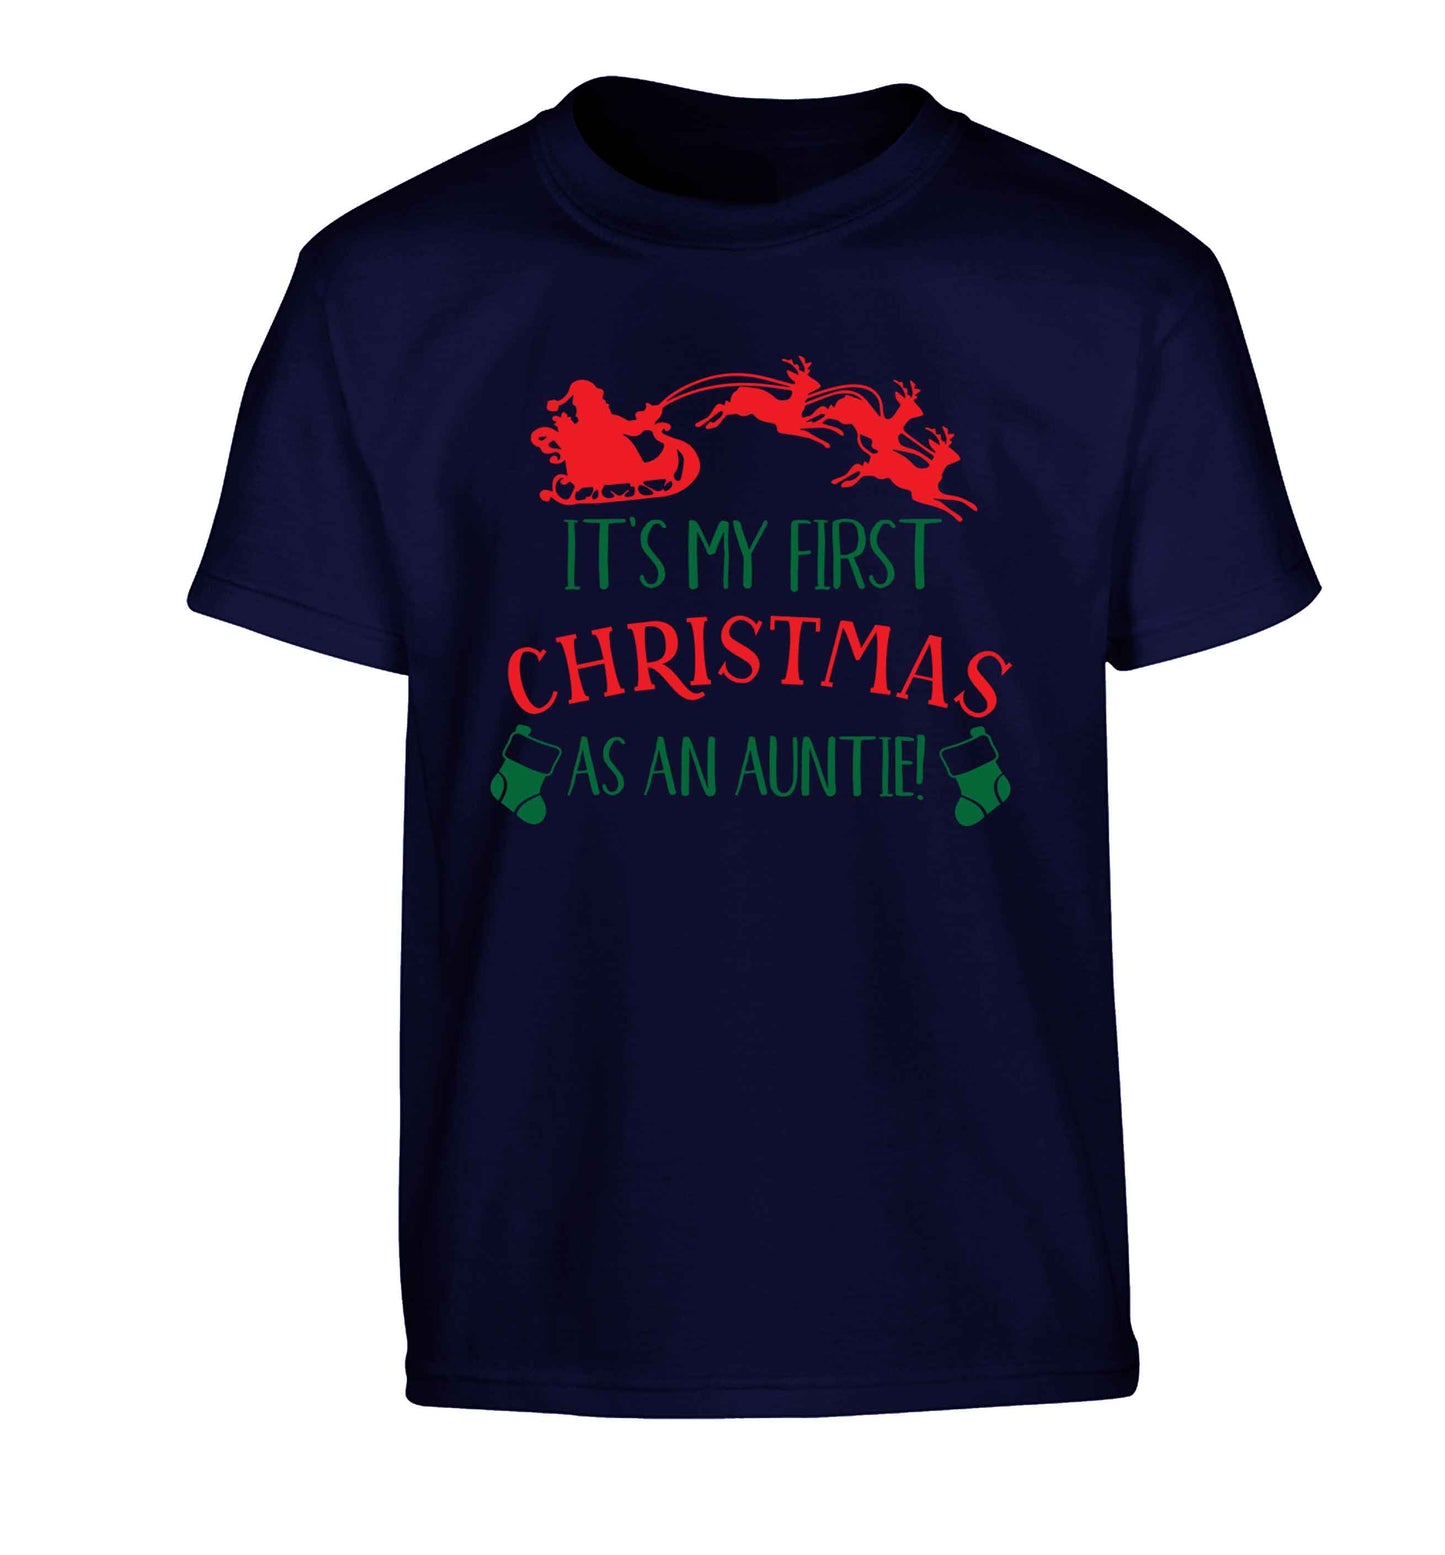 It's my first Christmas as an auntie! Children's navy Tshirt 12-13 Years